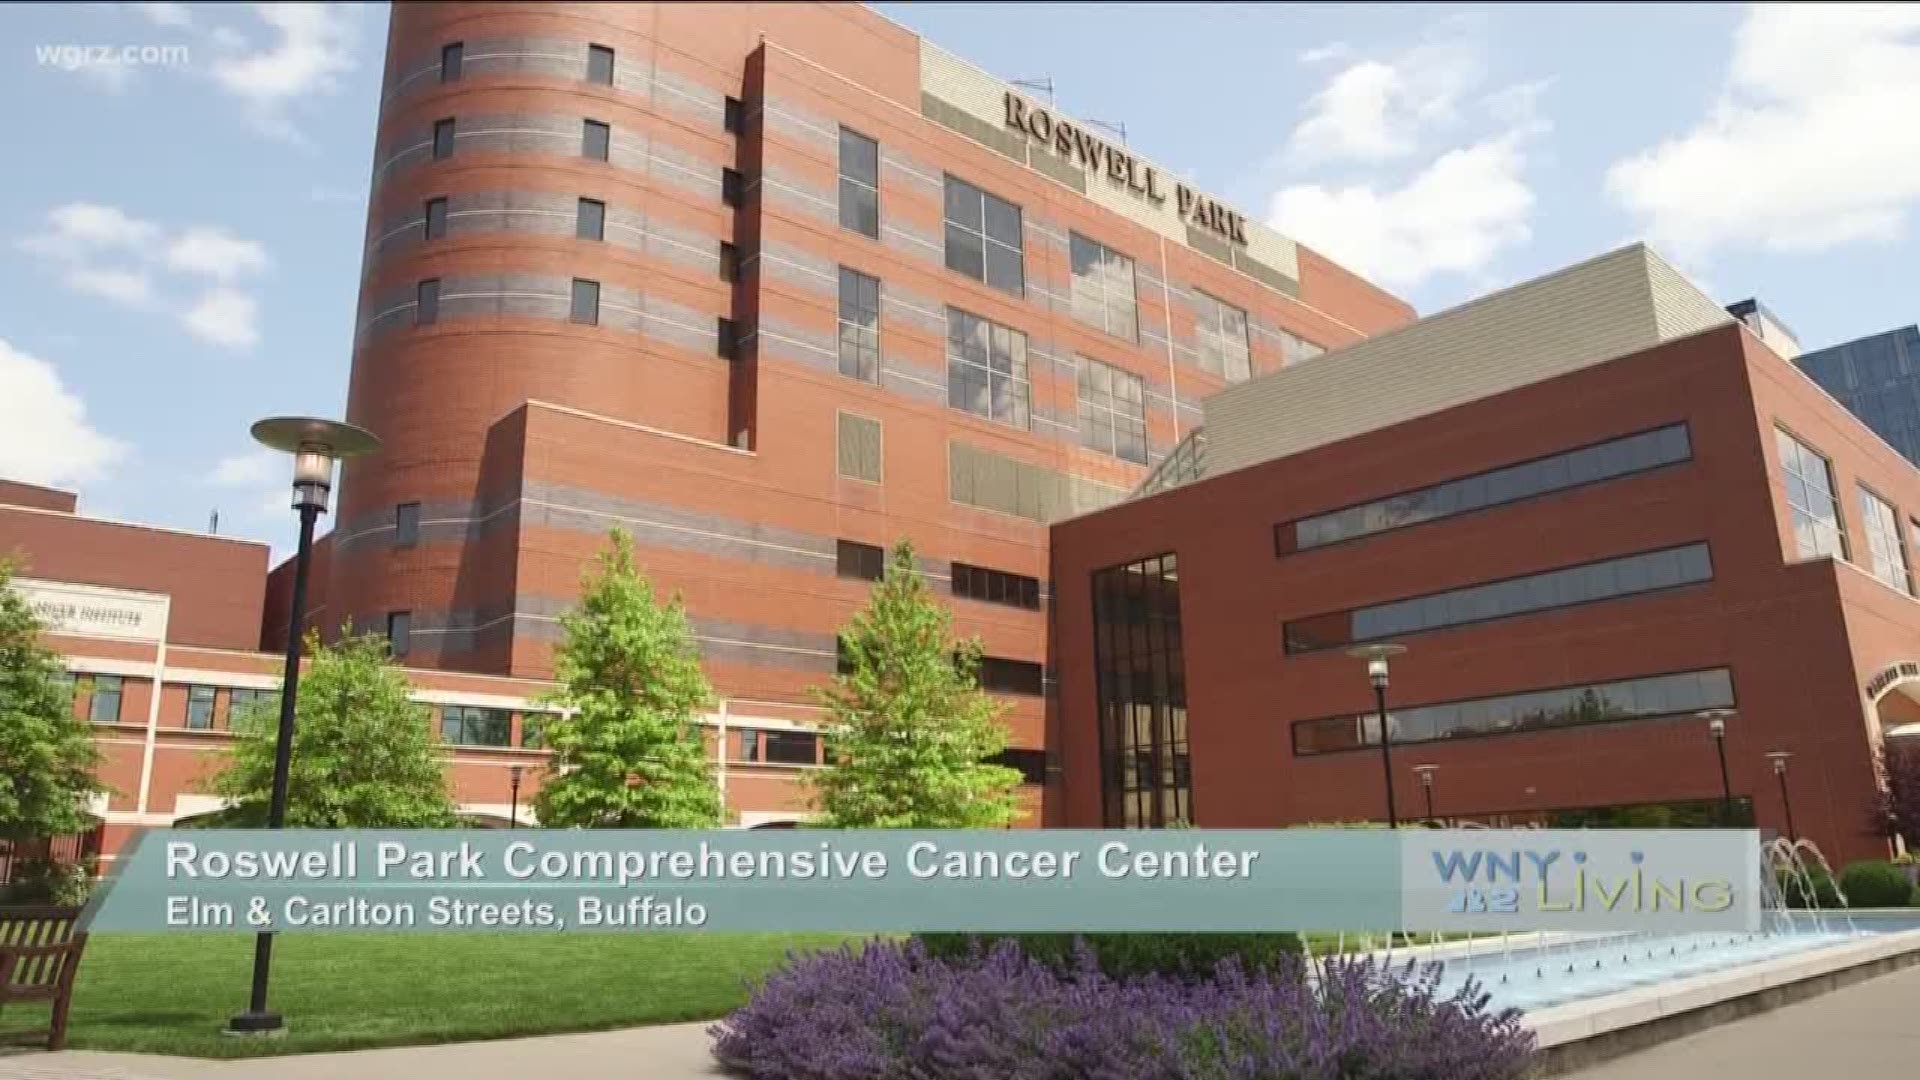 WNY Living - May 19 - Roswell Park Comprehensive Cancer Center